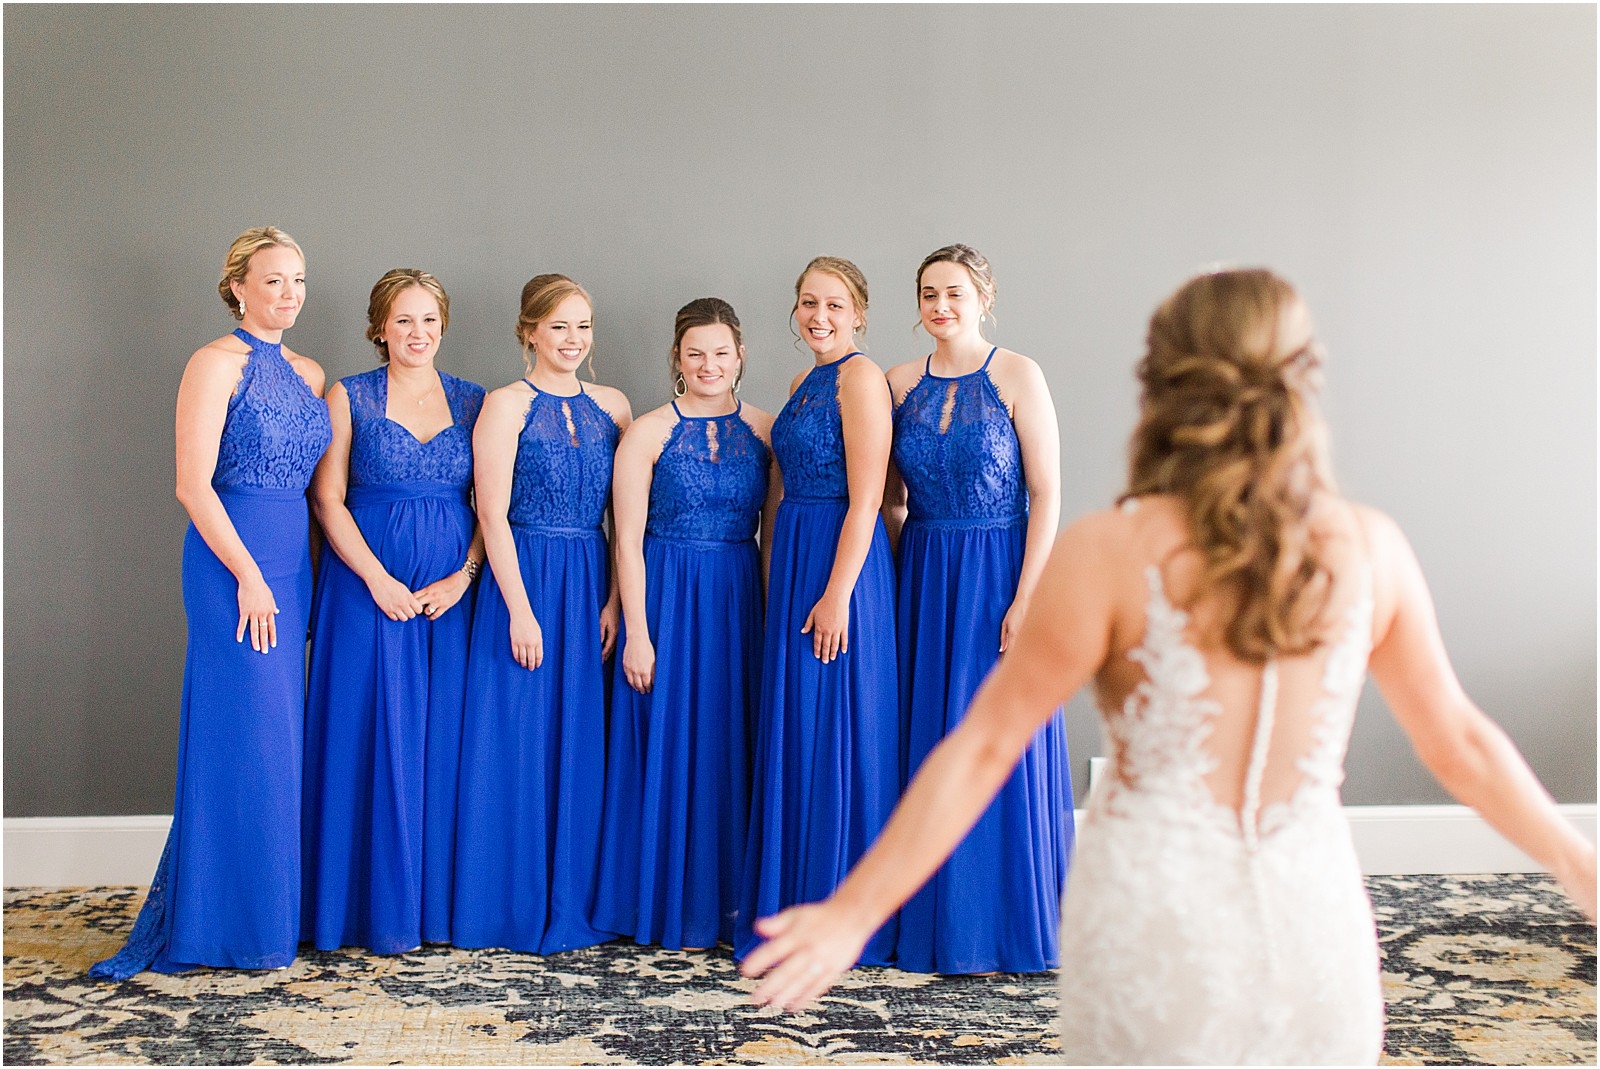 An Evansville County Club Wedding | Abby and Stratton 019.jpg